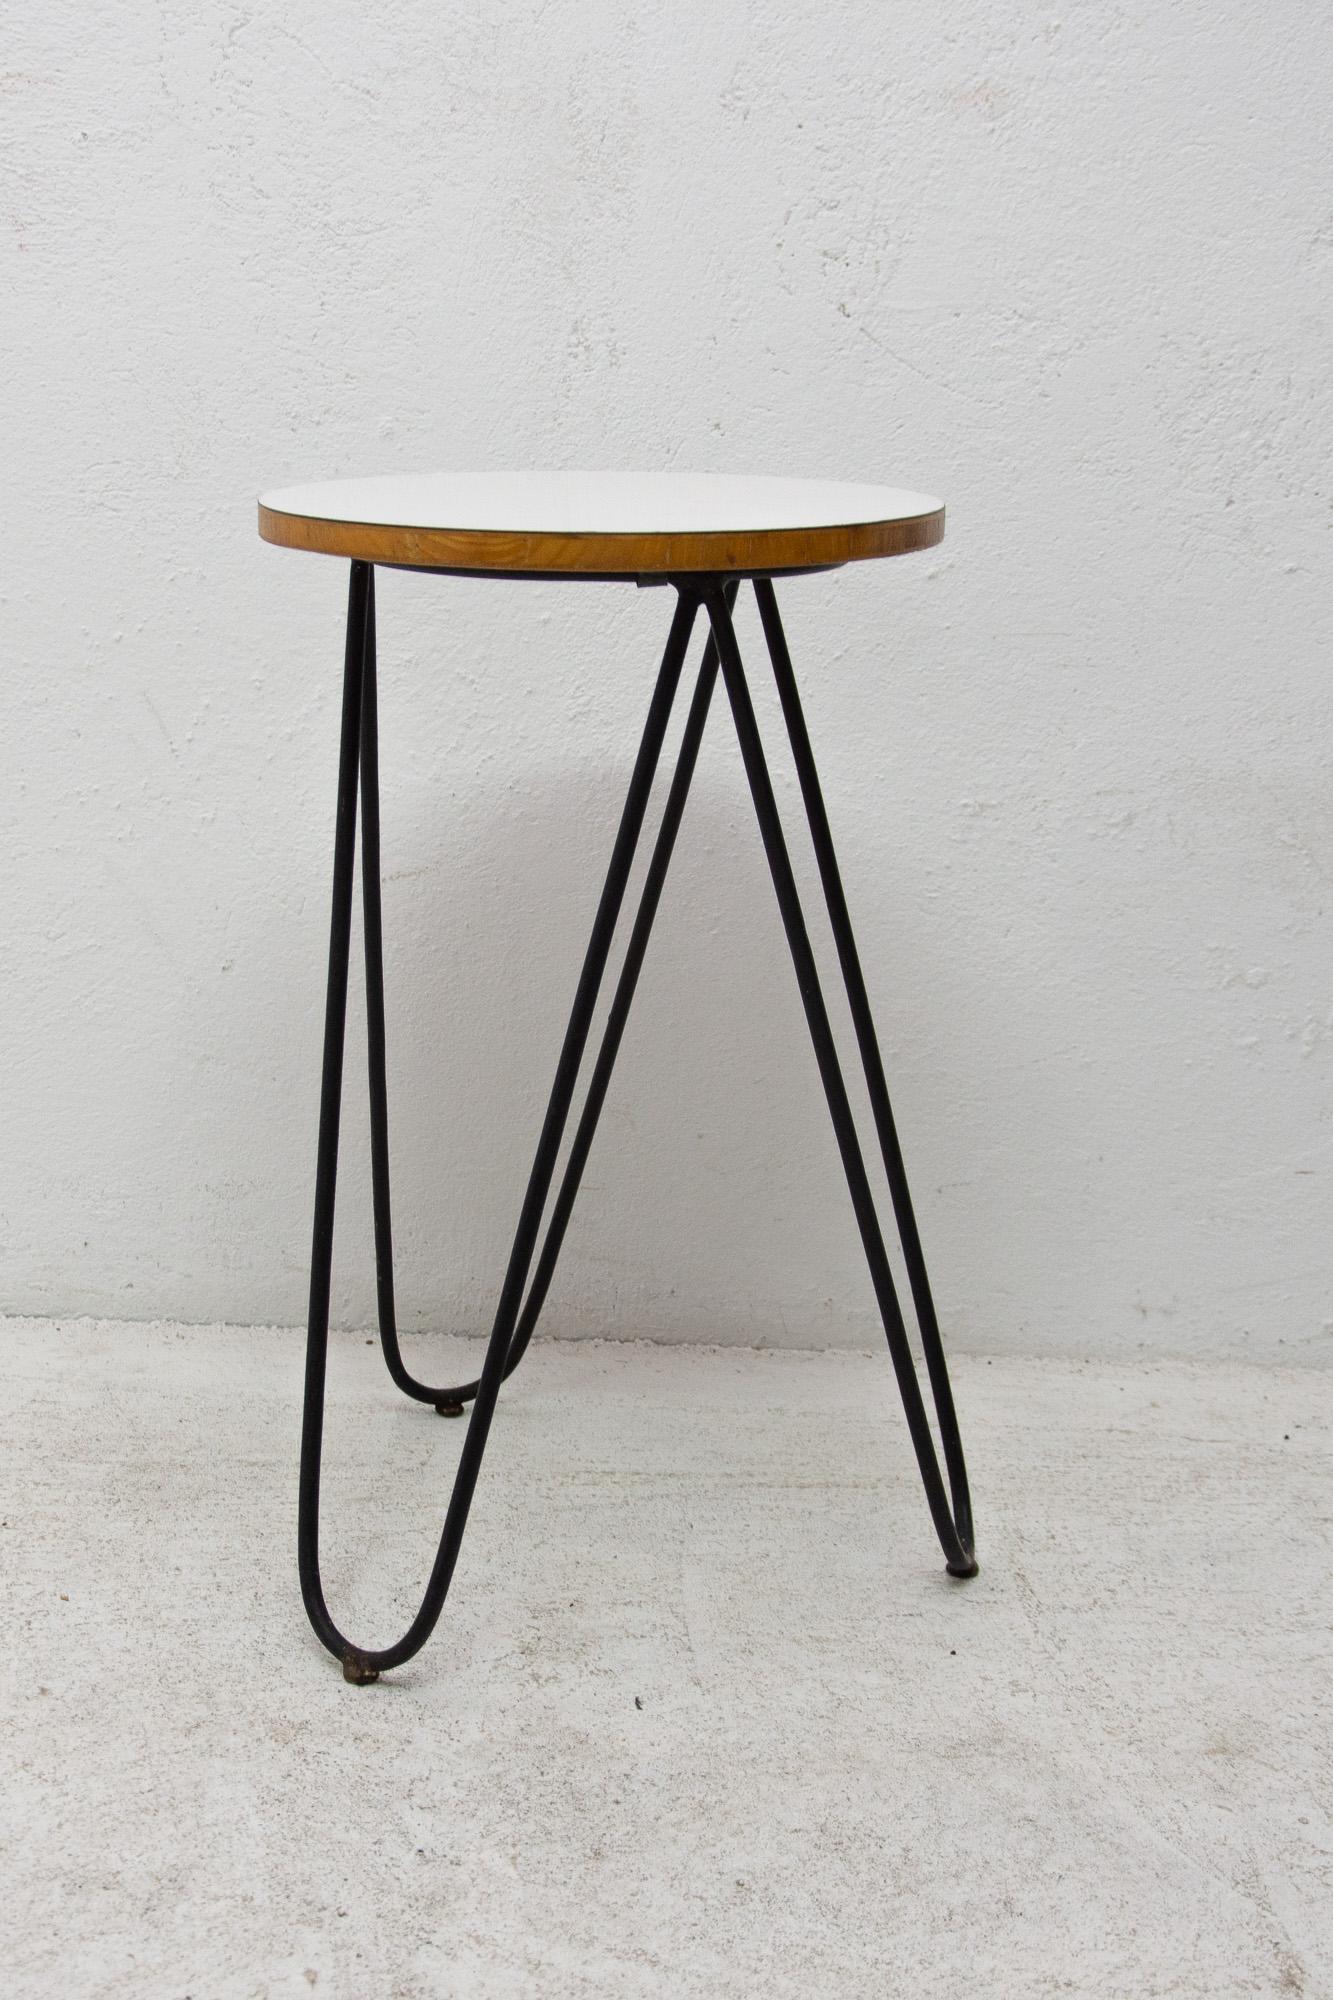 Midcentury round plant stand for flowers. It reflects the aesthetic ‘Brussel period’ of after EXPO 58.
An interesting example of Central European furniture design from the middle of the 20th century. Made in the former Czechoslovakia in the 1960s.